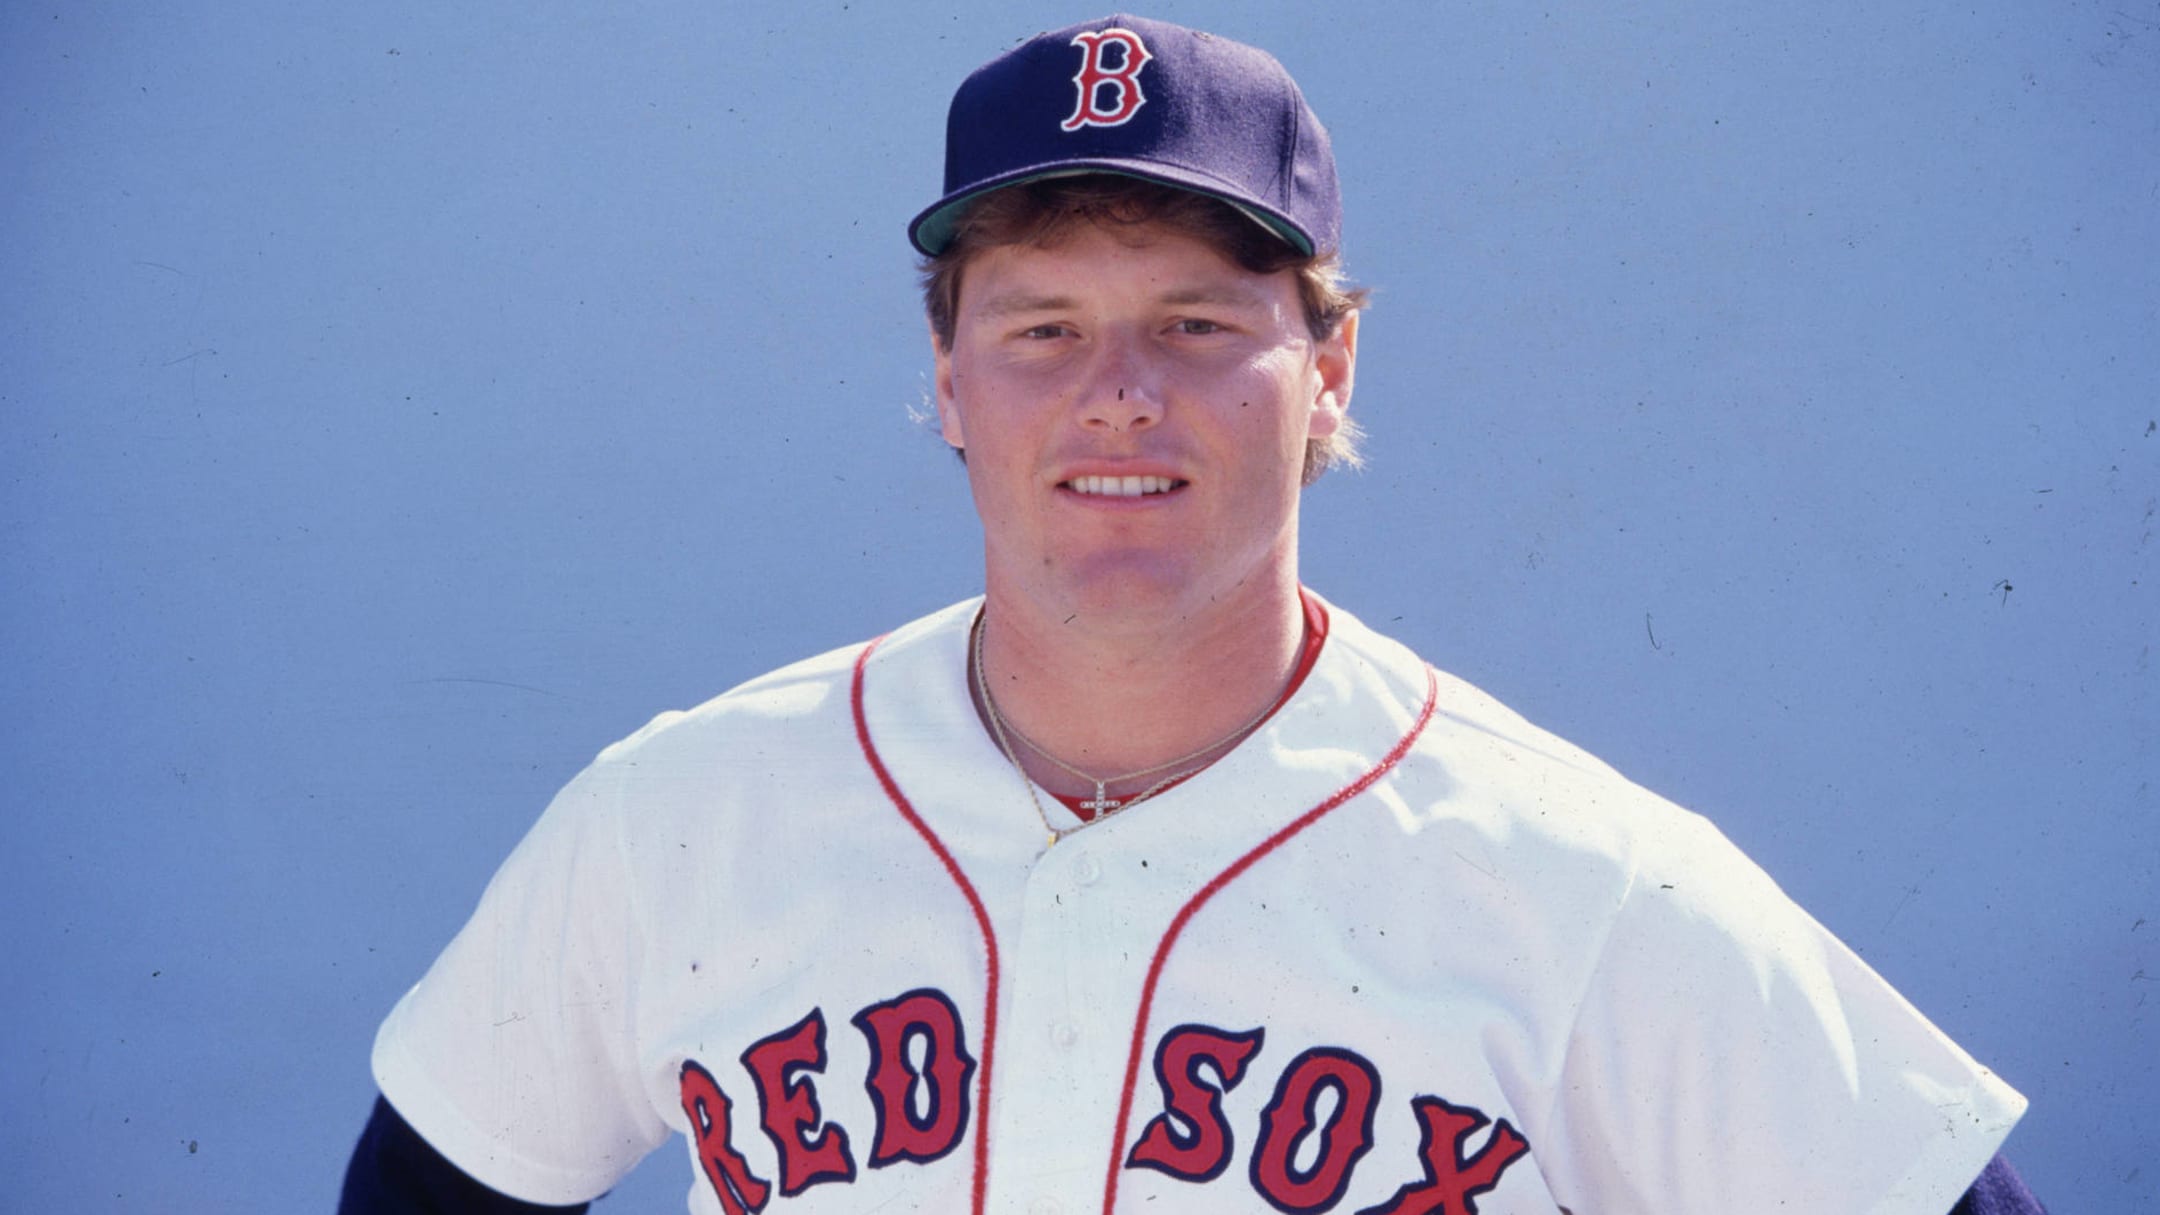 Striking Out toward Cooperstown: Roger Clemens sets strikeout